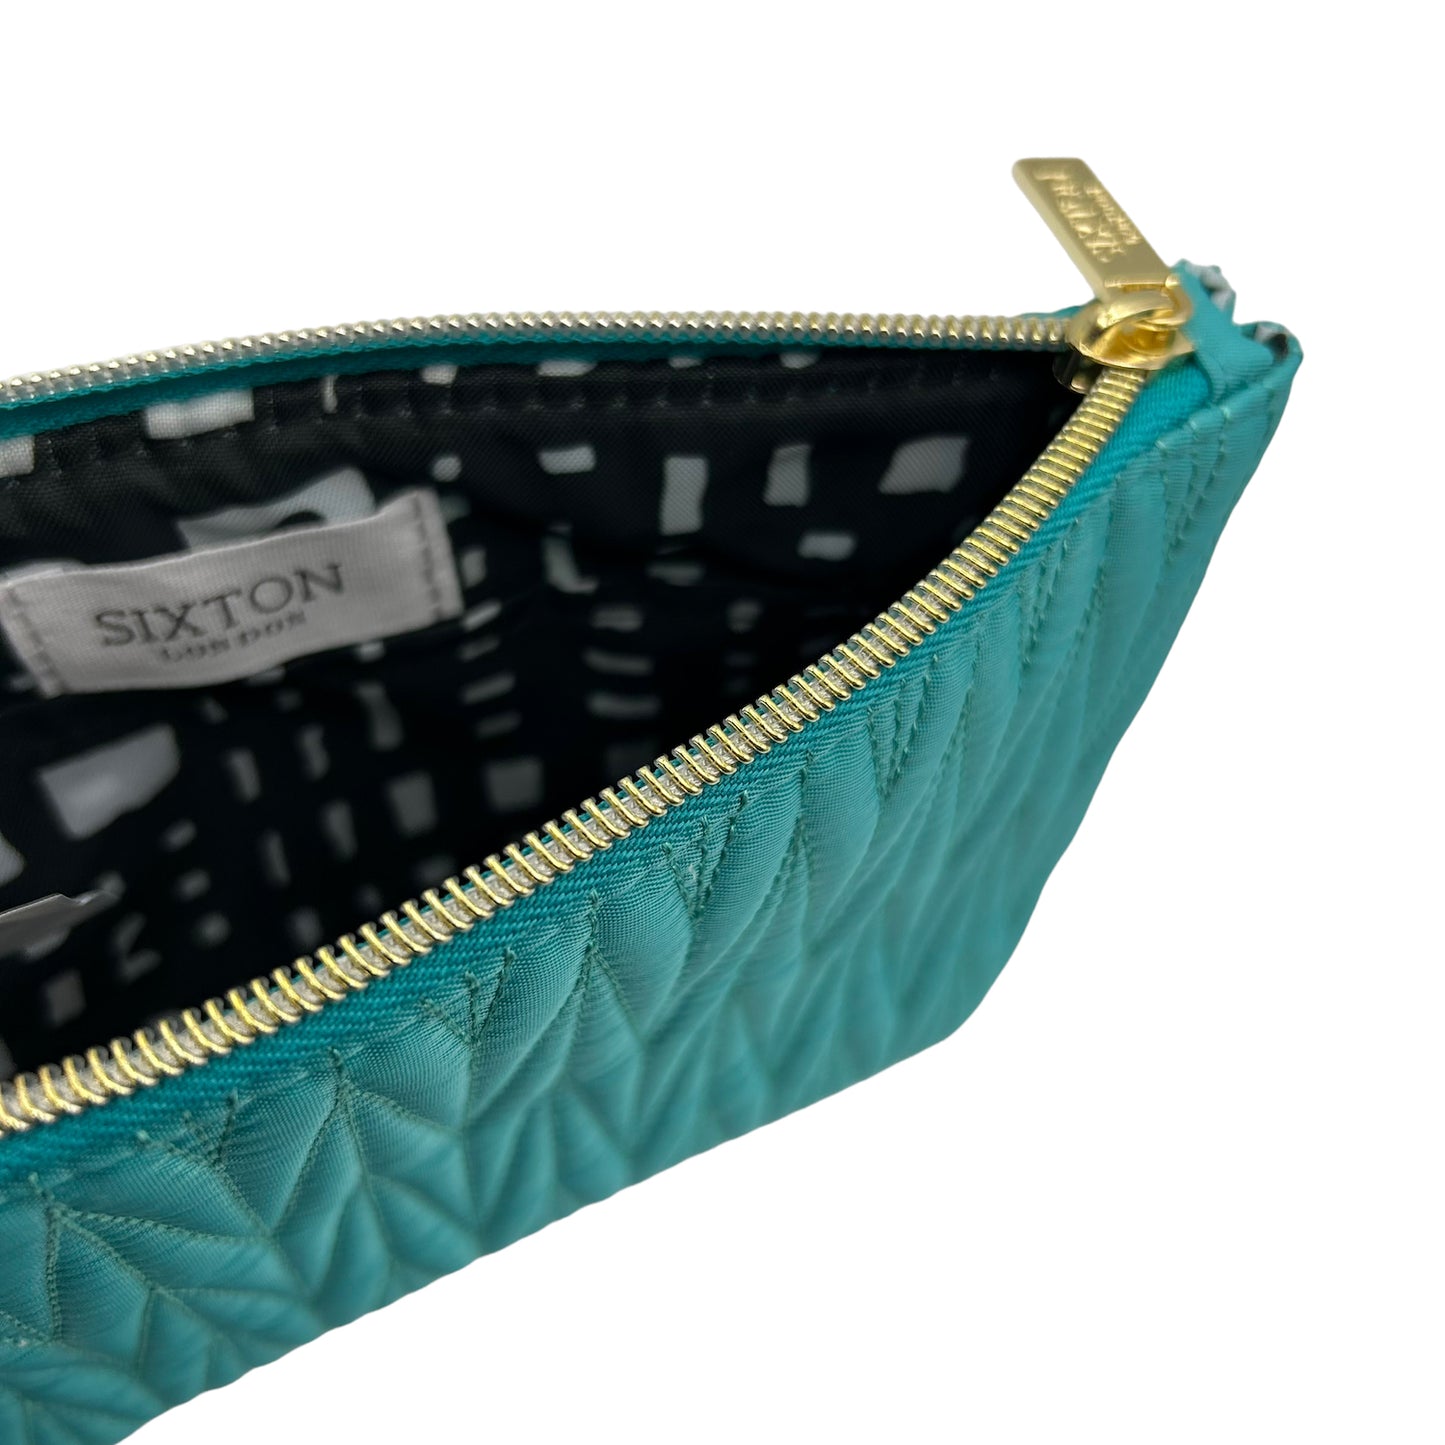 Turquoise Tribeca make up bag with a turquoise eye pin